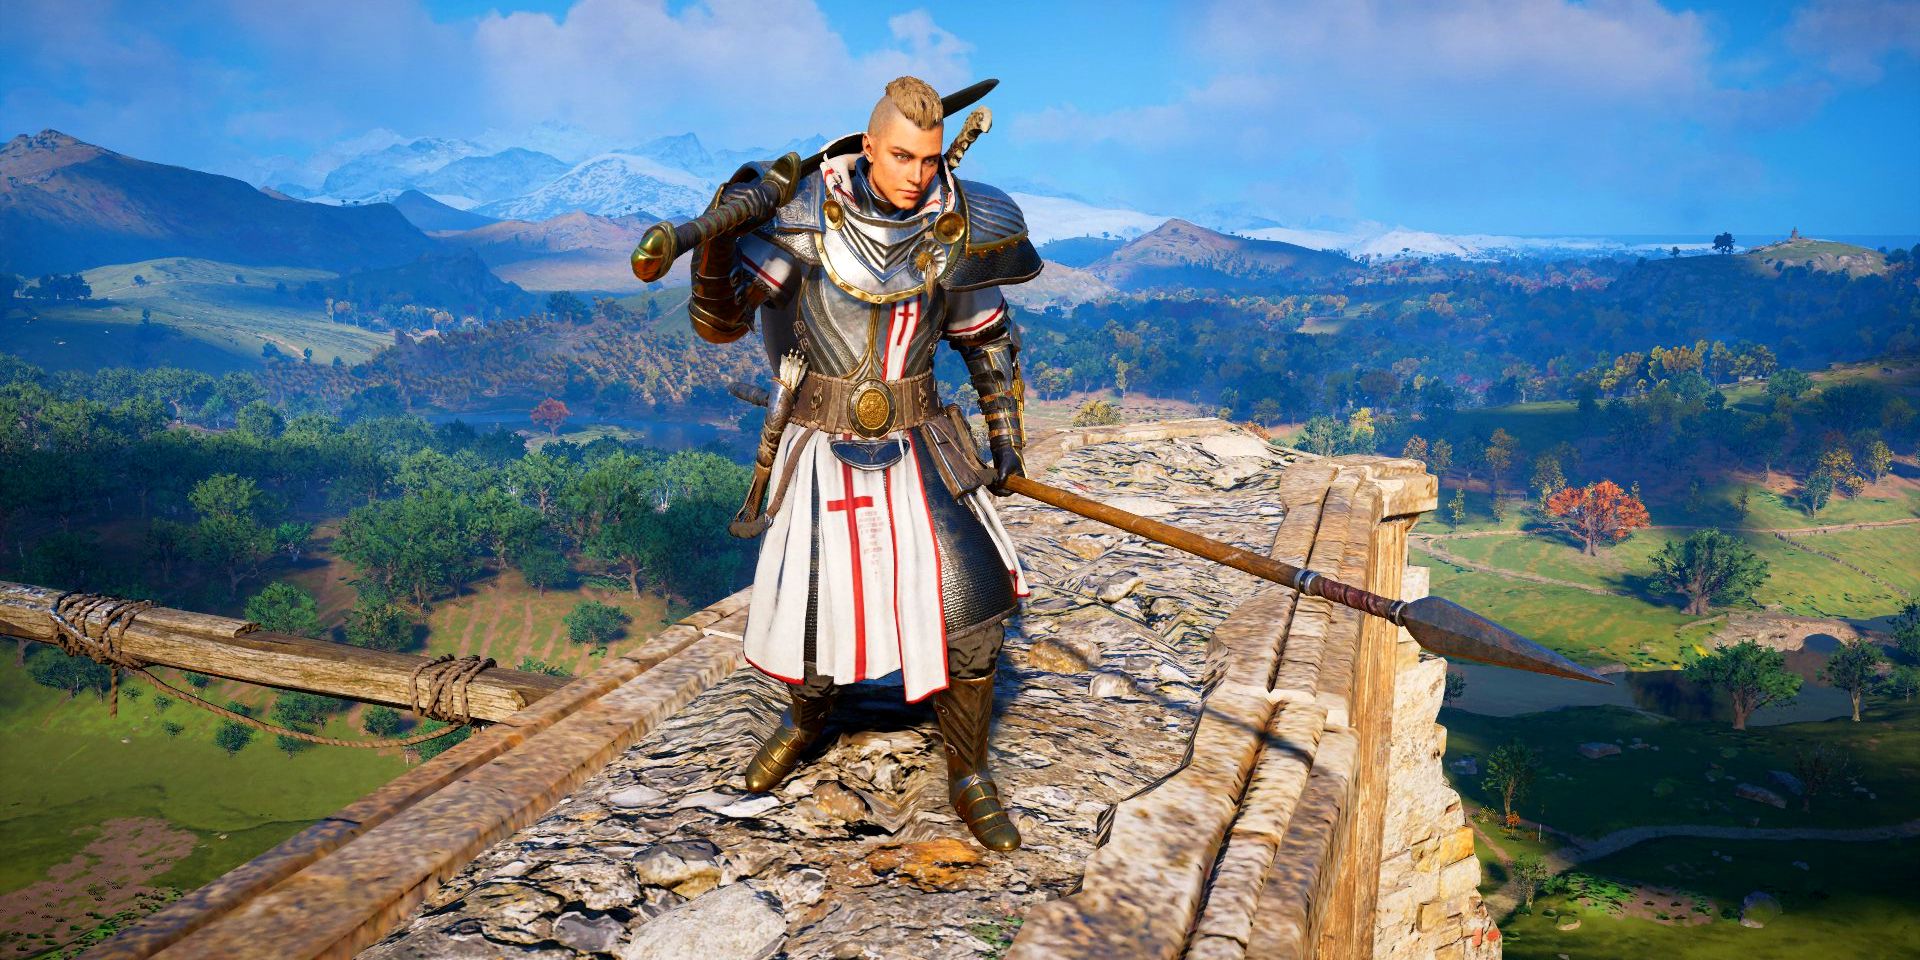 player holding a great sword and a spear on a ruin.